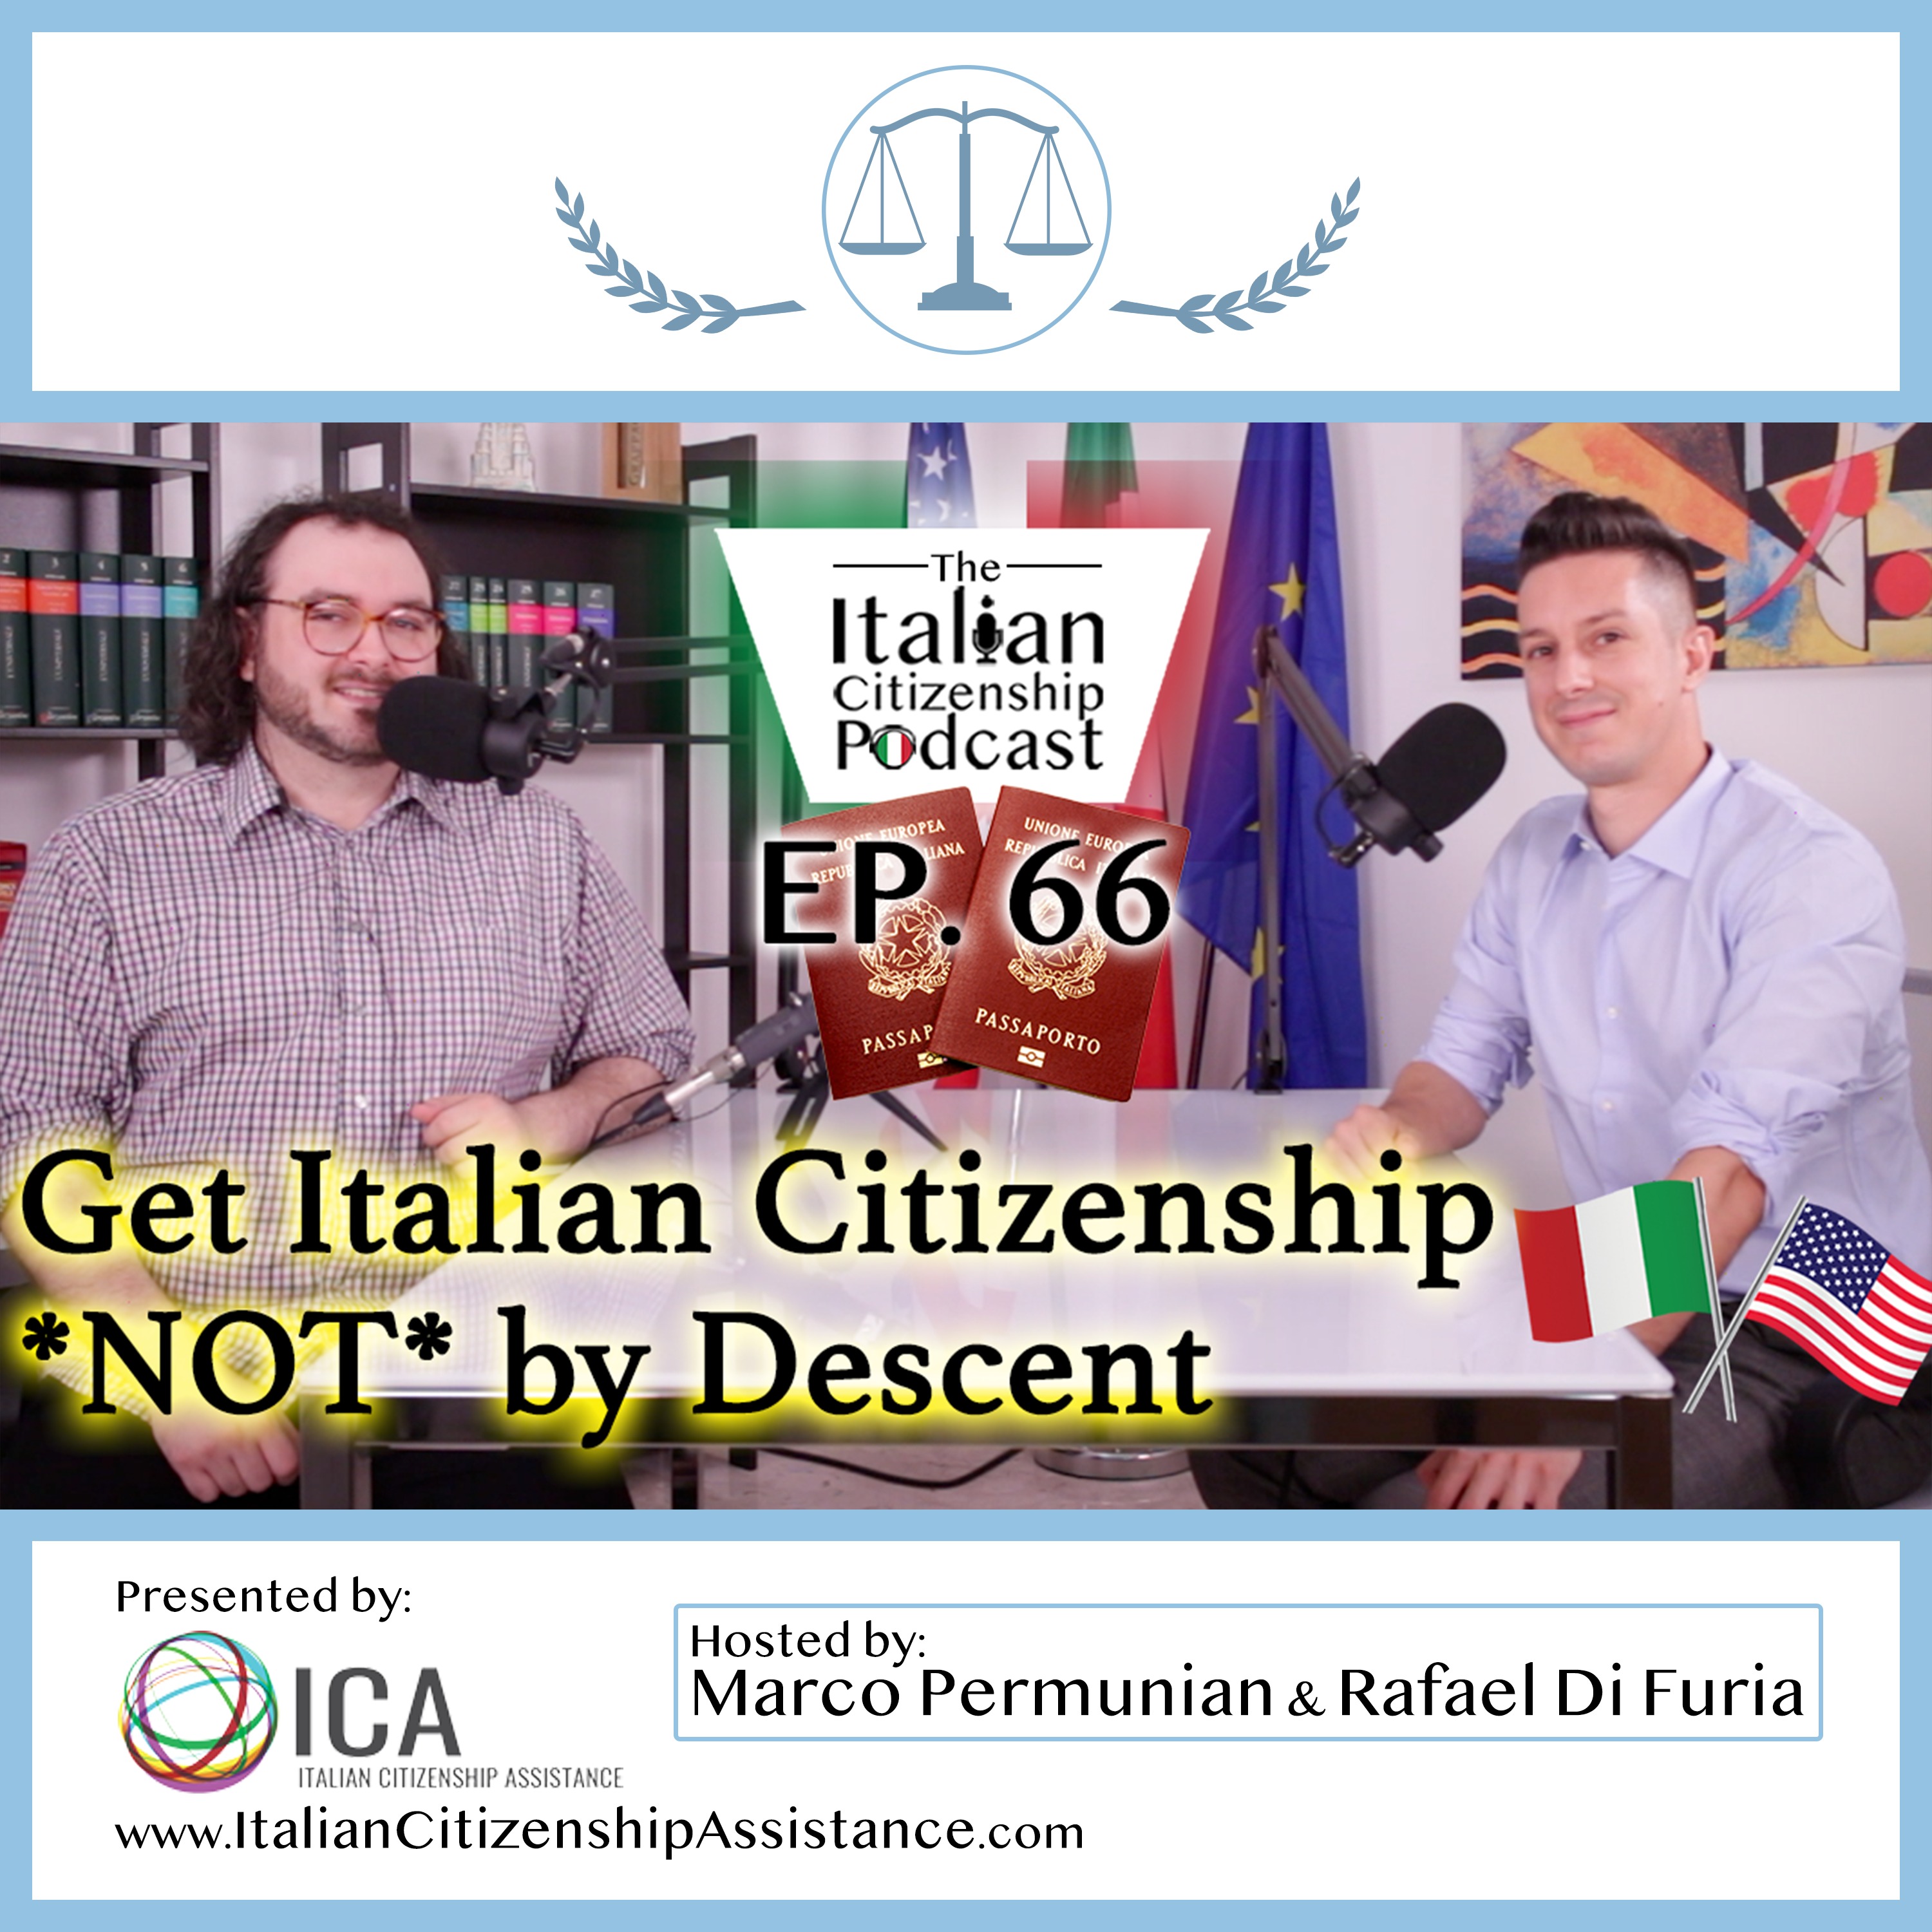 How To Get Italian Citizenship (NOT by Descent)